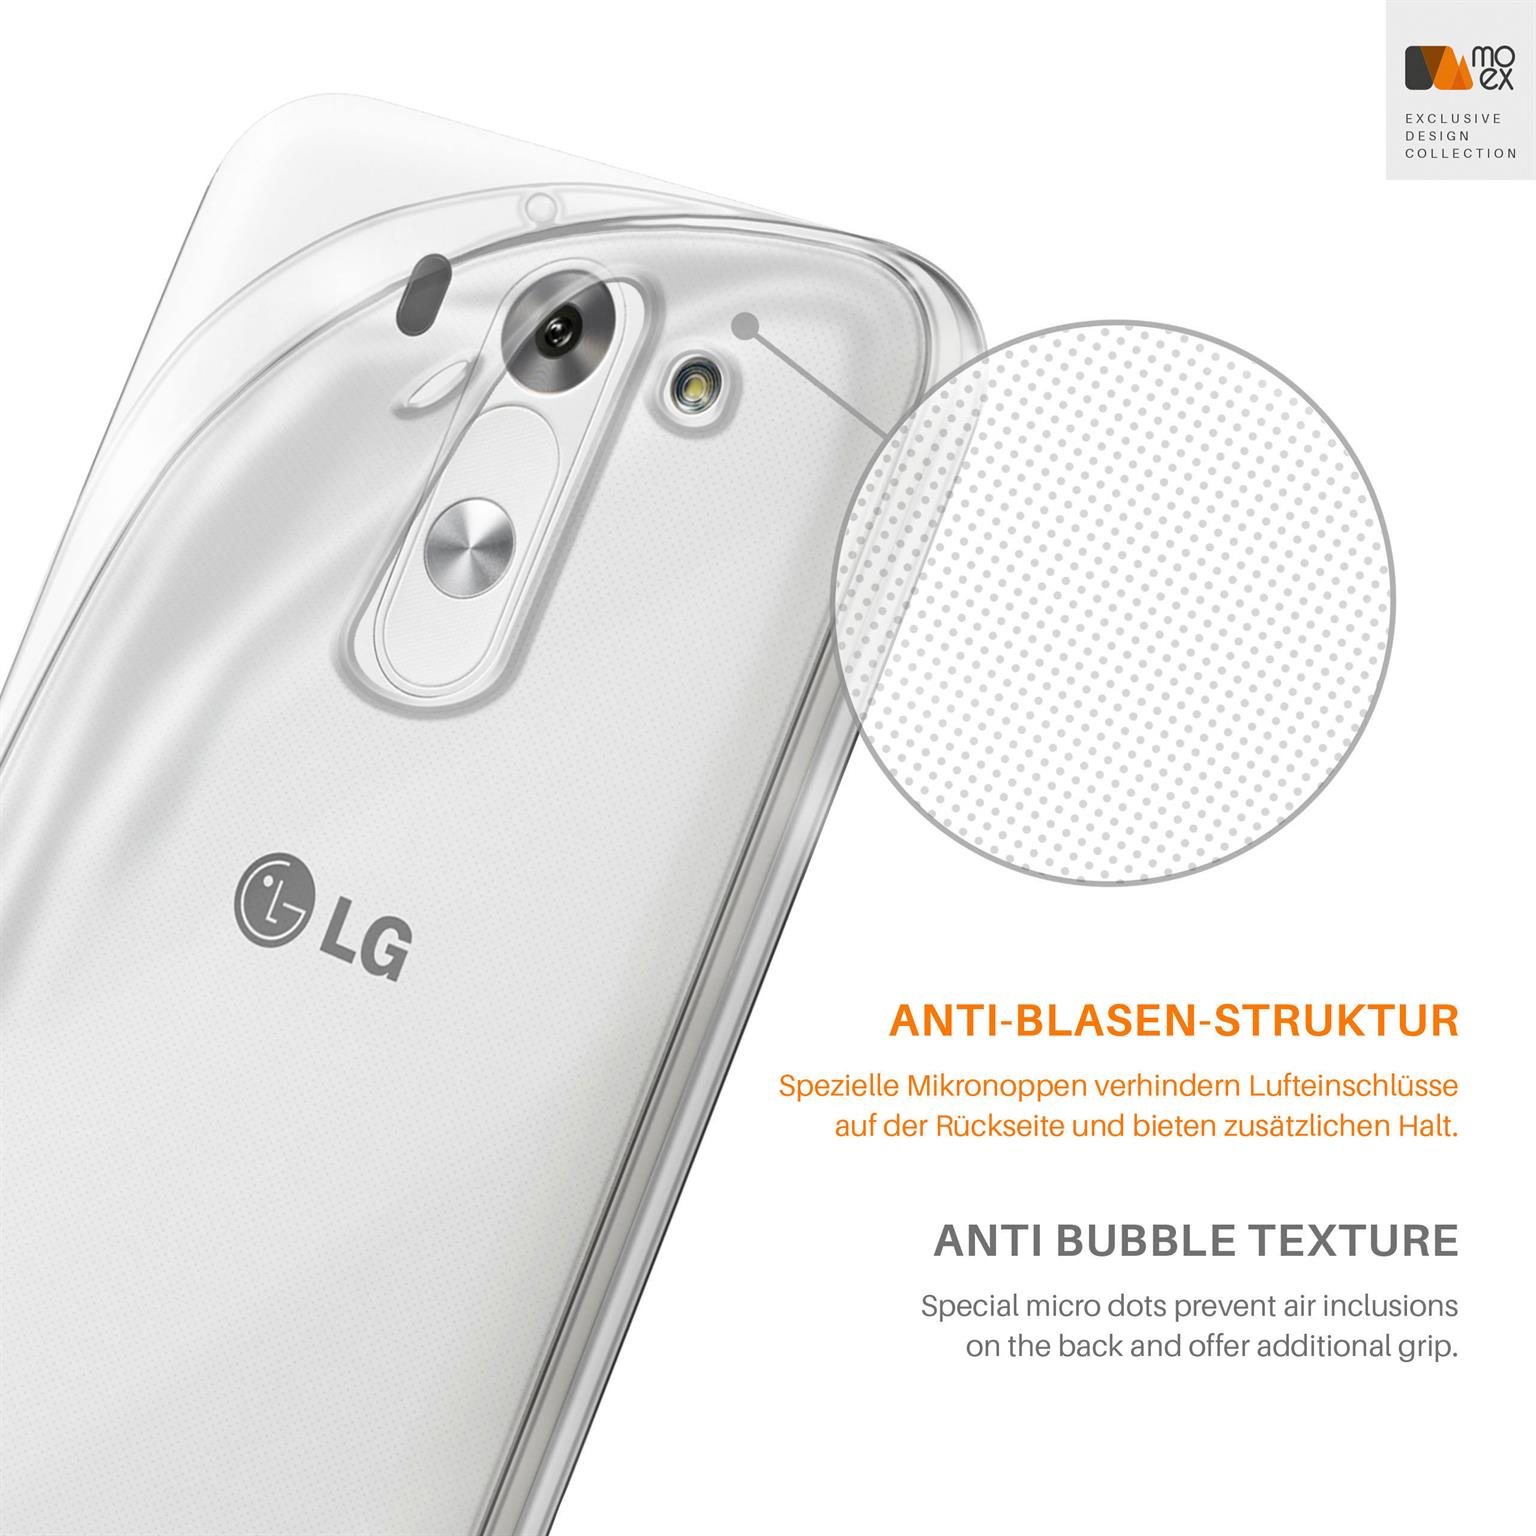 MOEX Aero Case, Backcover, G3, LG, Crystal-Clear